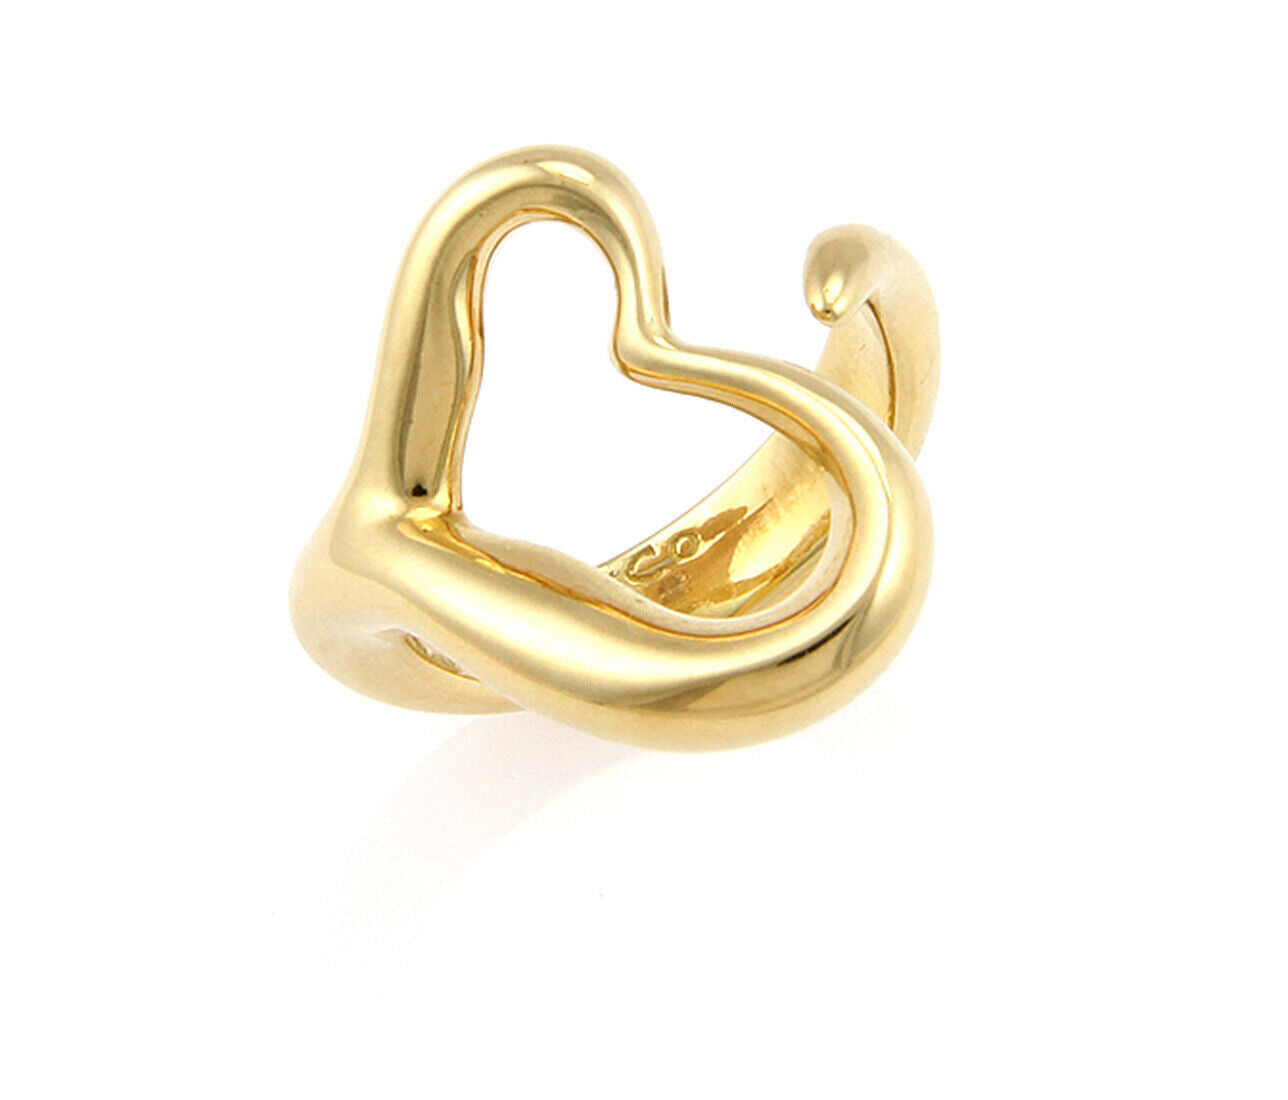 Tiffany & Co. Elsa Peretti Open Heart 18k Yellow Gold Curved Band Ring | Rings | catalog, Designer Jewelry, Elsa Peretti, Rings, Tiffany & Co. | Tiffany & Co.